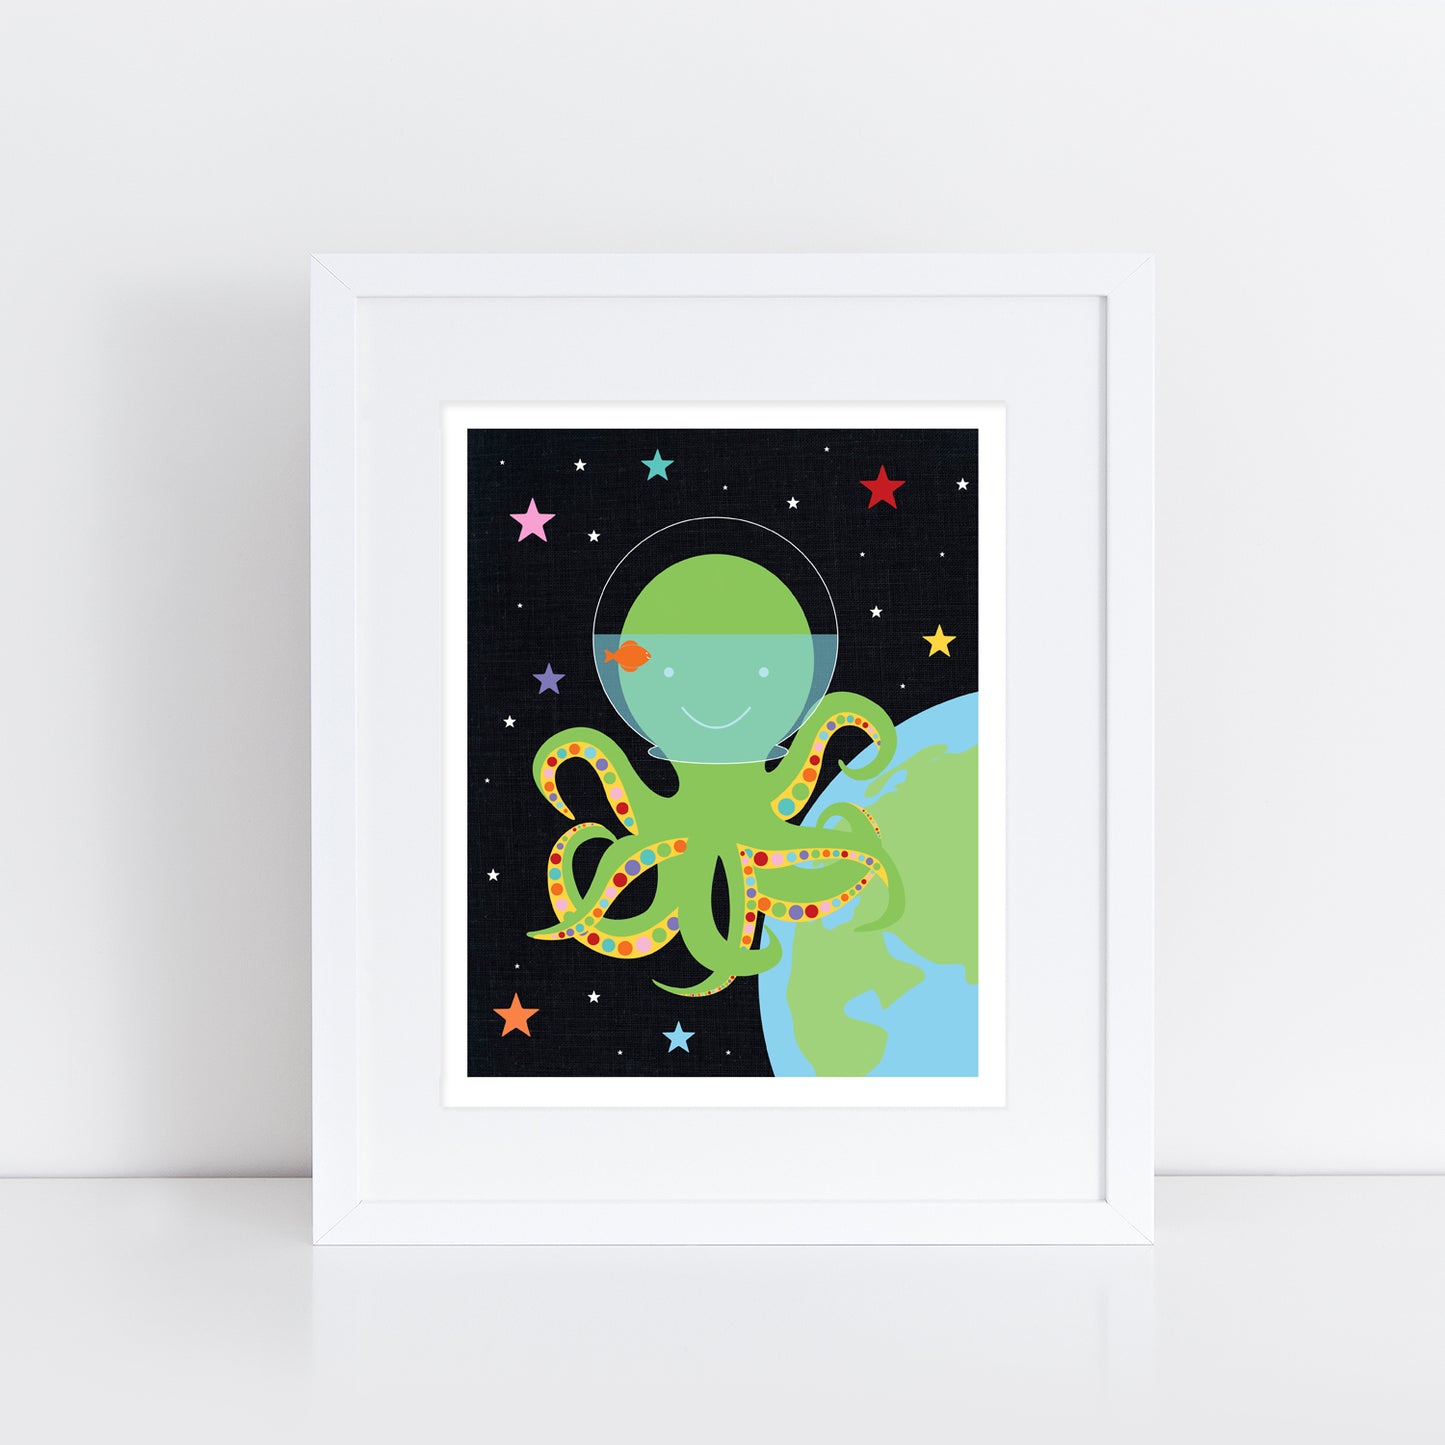 octopus in space with goldfish bowl on his head